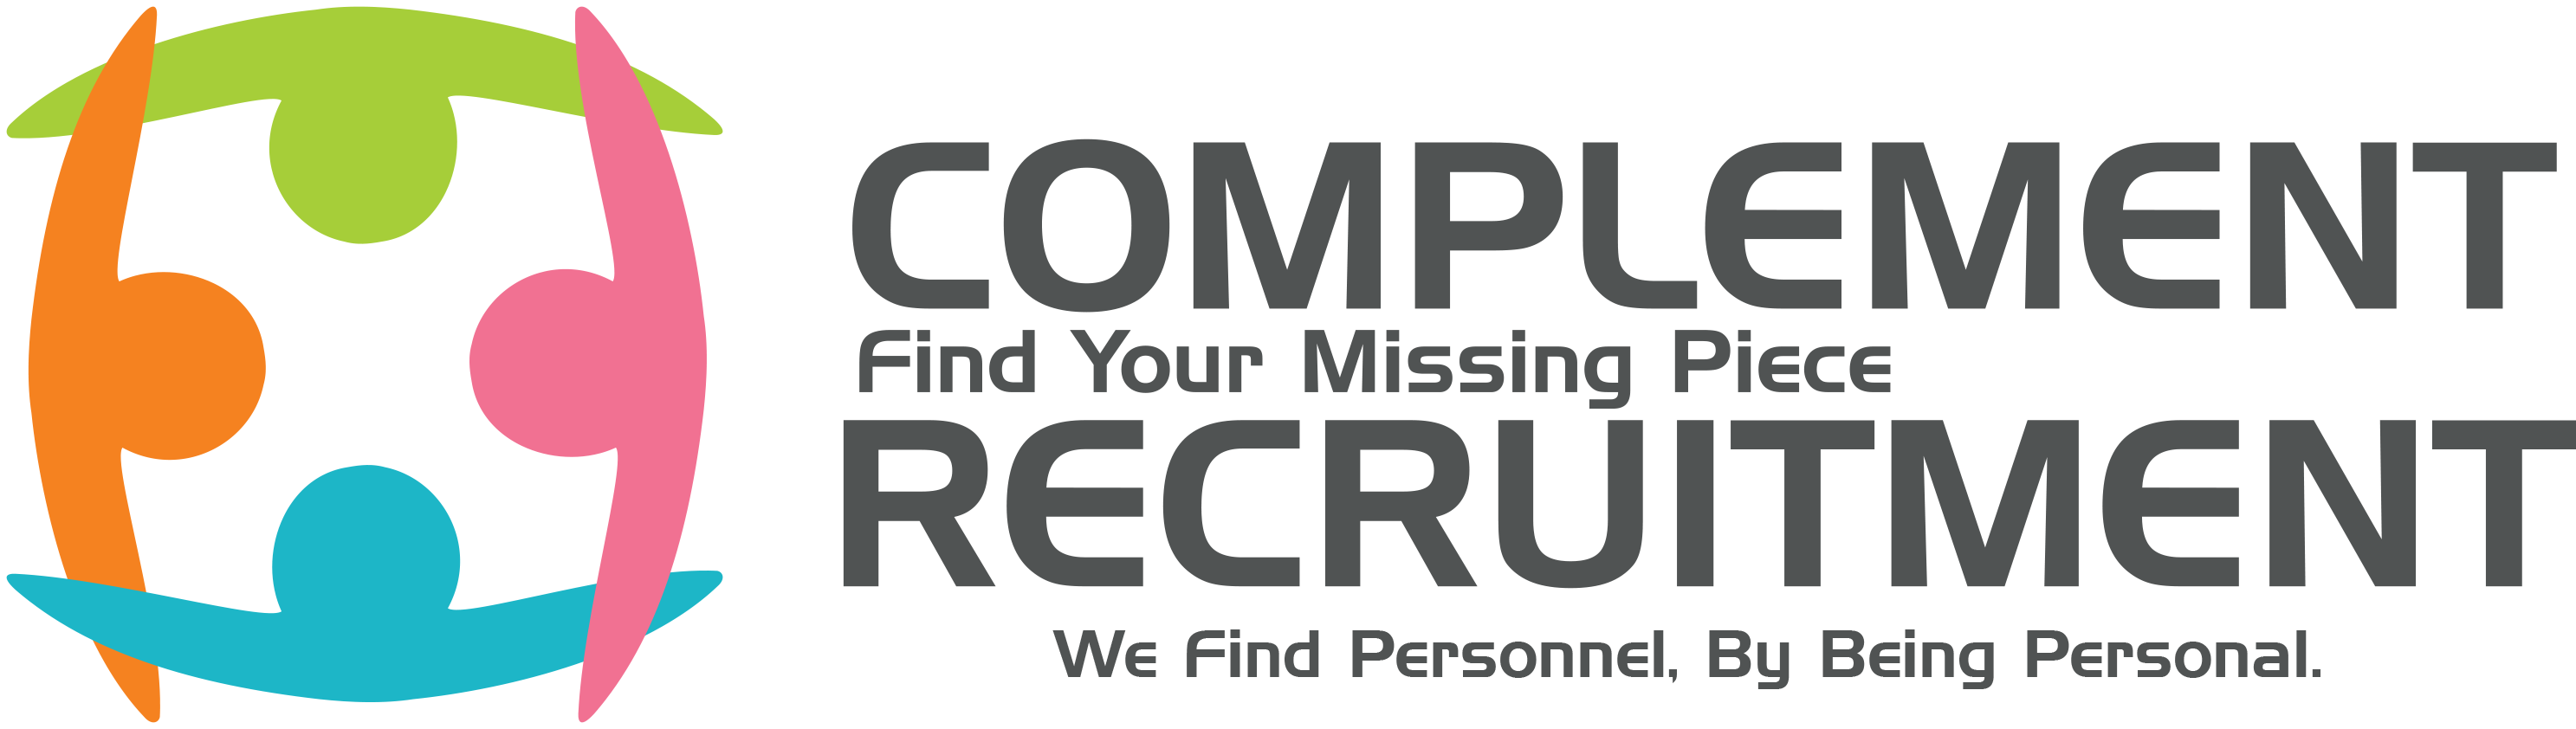 https://www.mncjobs.co.za/company/complement-recruitment-1591713603